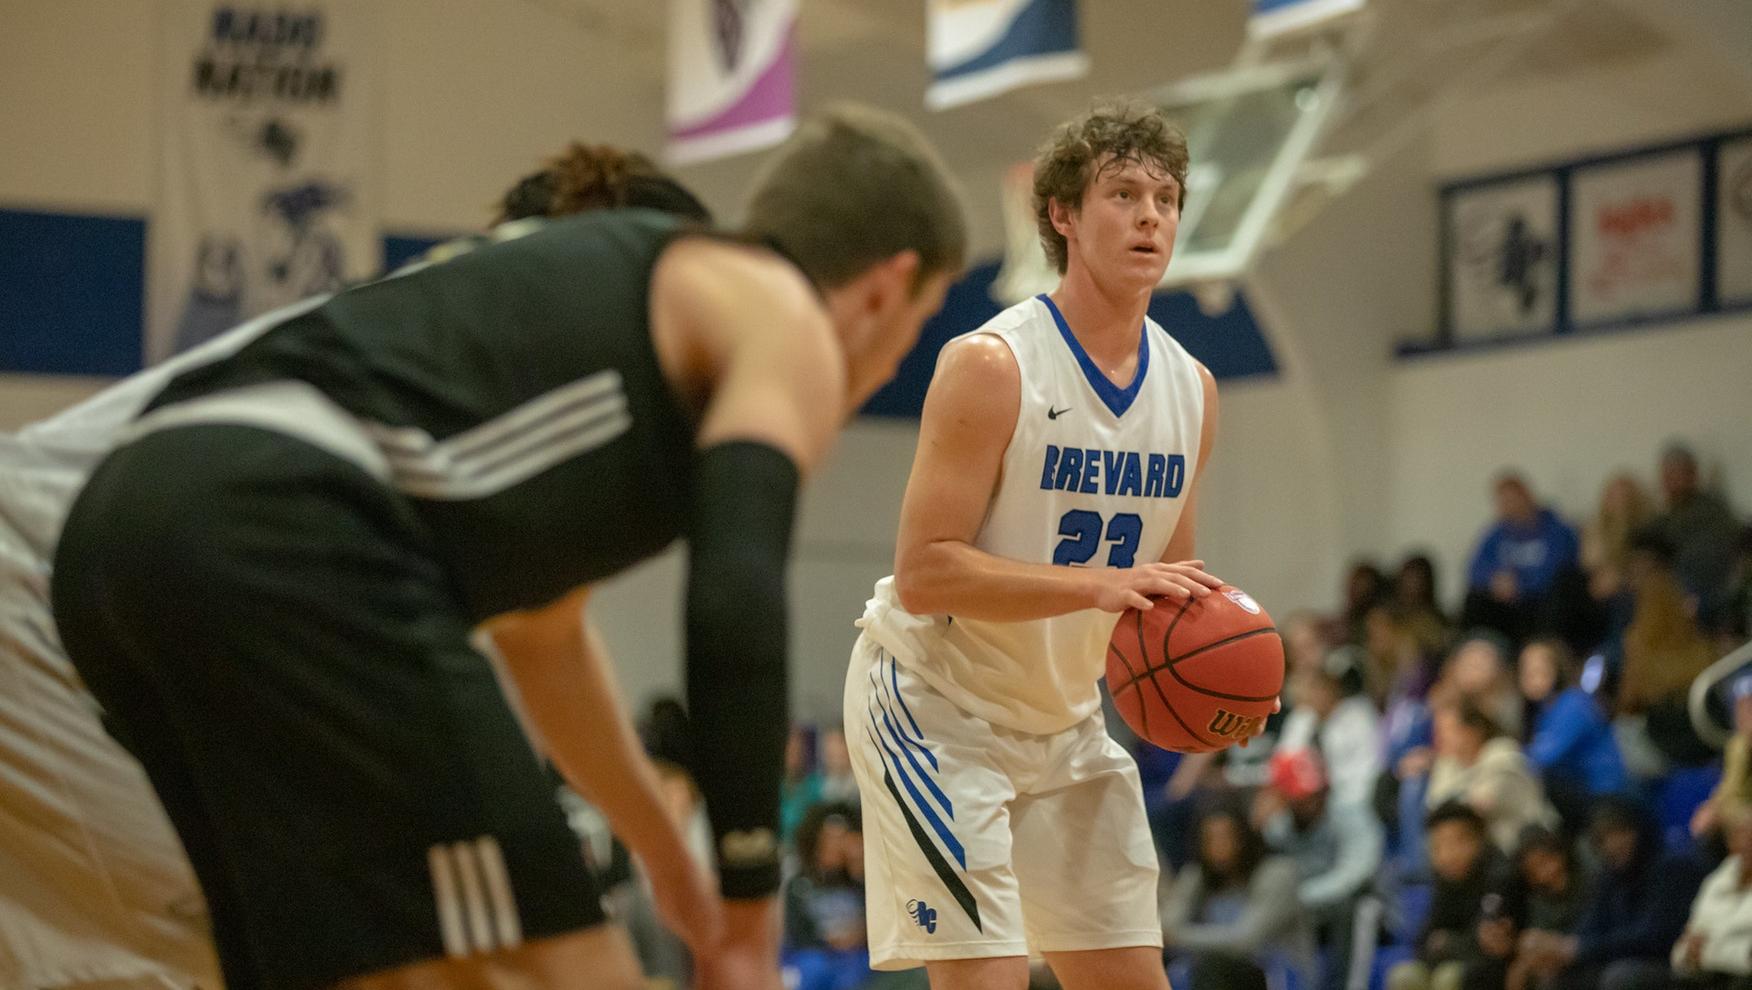 Sophomore Hayden Cassell scored a career-high 16 points in Brevard's matchup against LaGrange (Photo courtesy of Thom Kennedy '21).